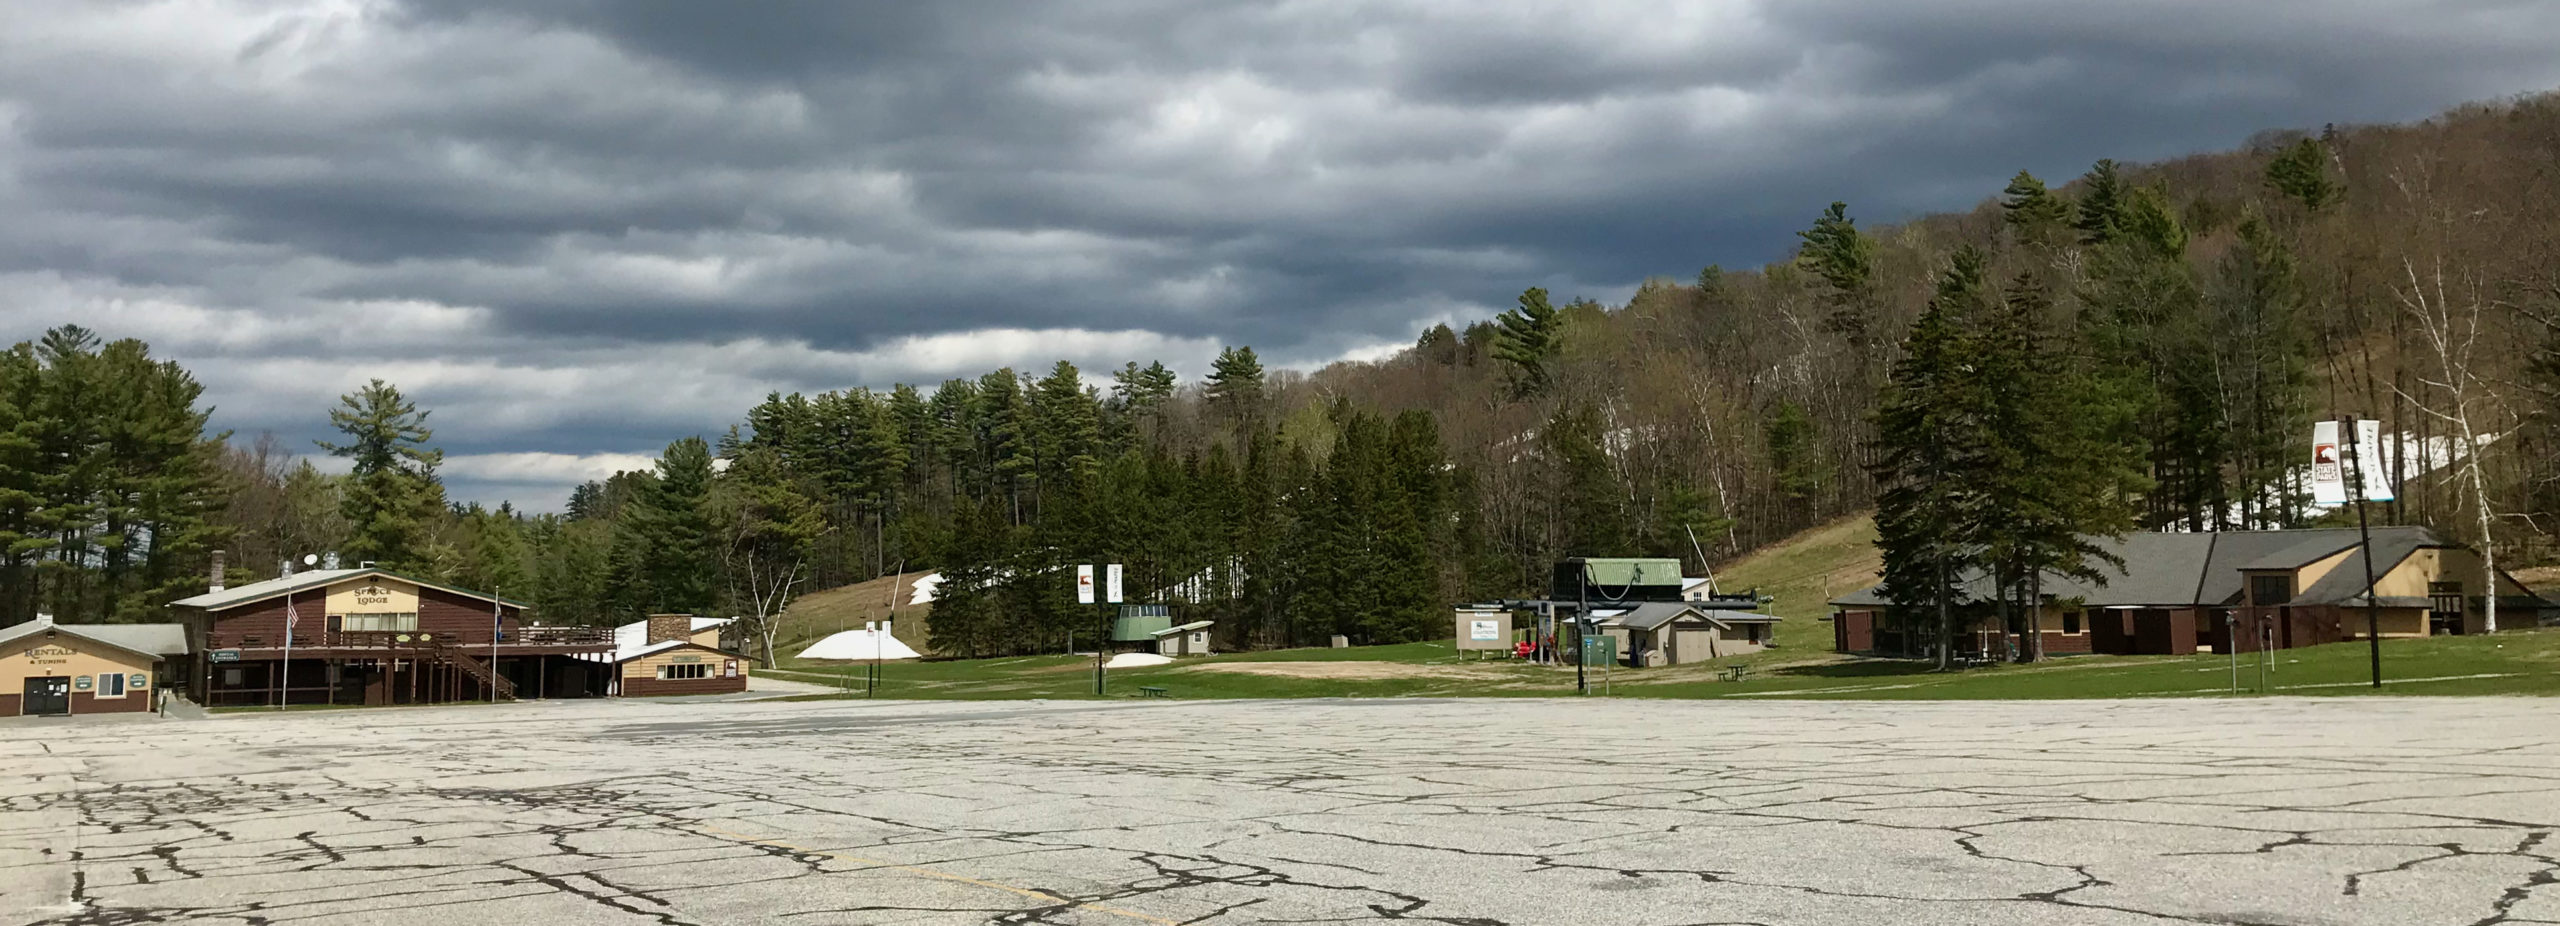 Mount Sunapee Resort Five Year 2020-2025 and Revised EMP